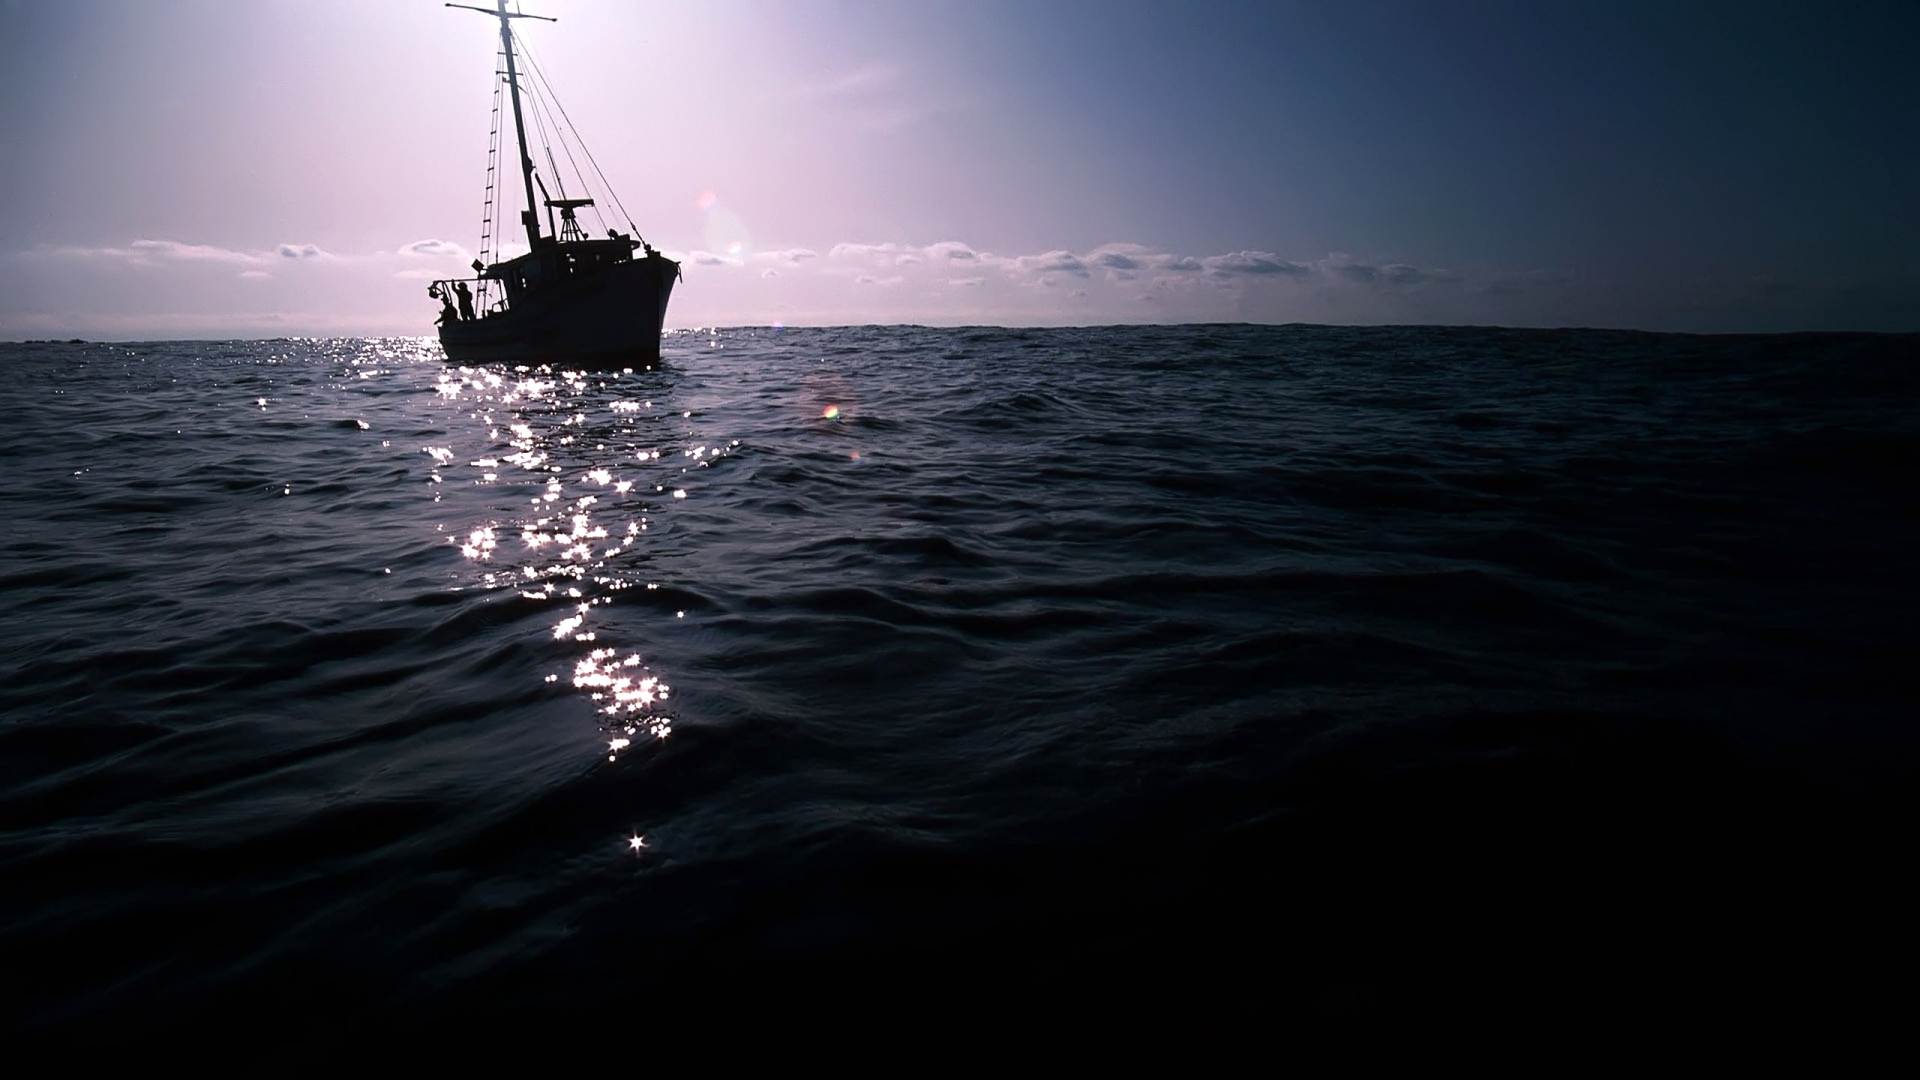 The Dark Boat on Sea for 1920 x 1080 HDTV 1080p resolution